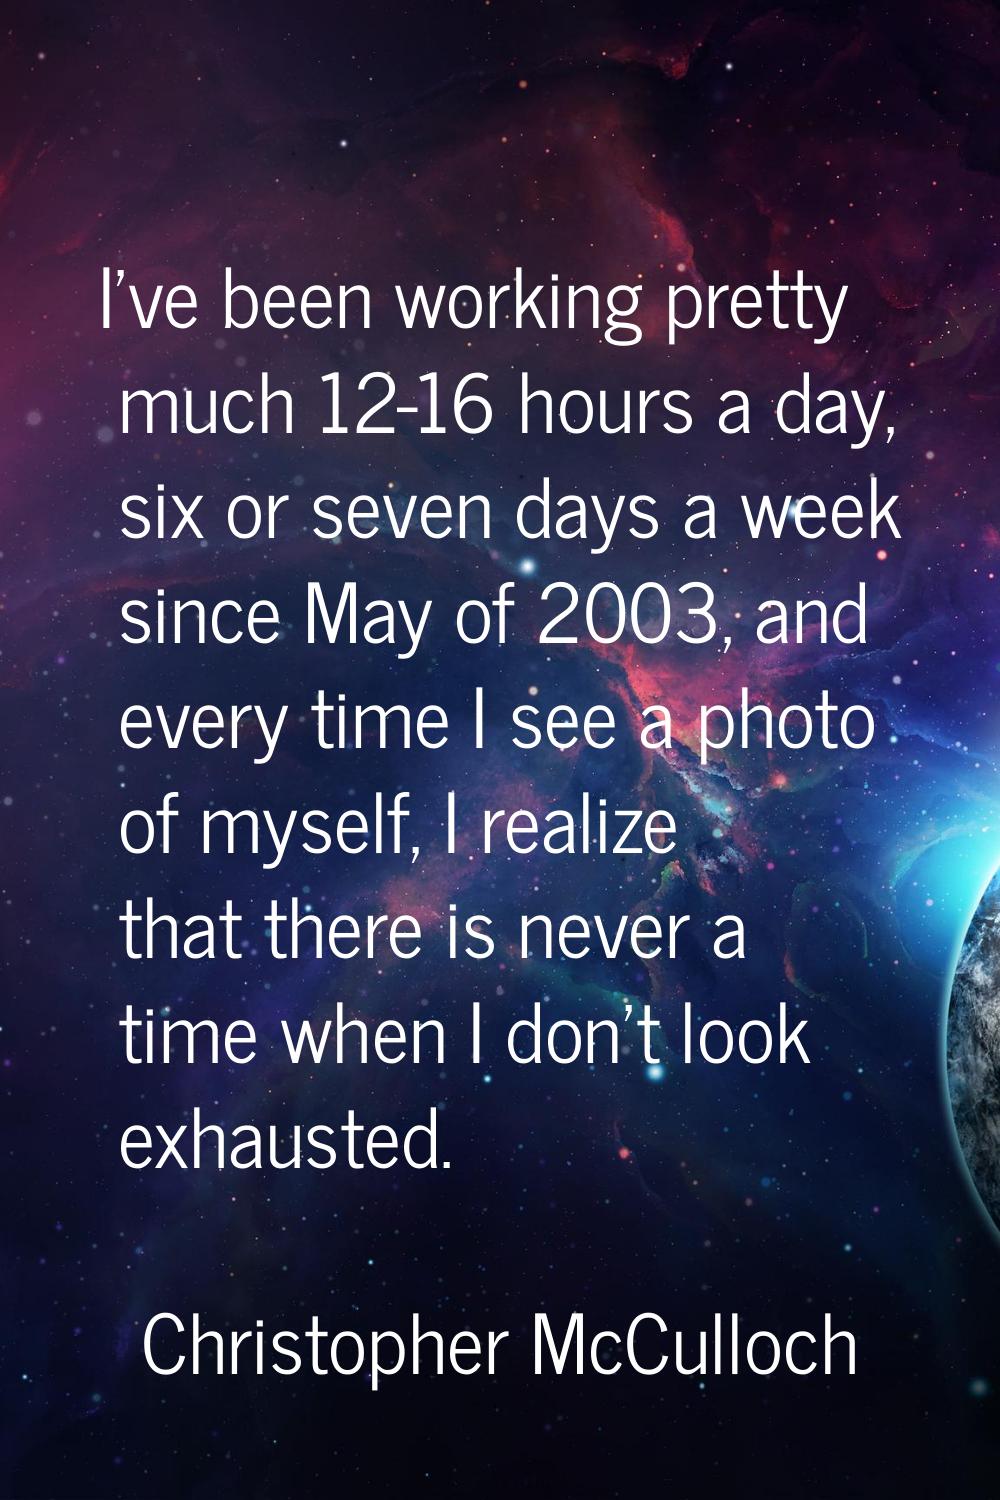 I've been working pretty much 12-16 hours a day, six or seven days a week since May of 2003, and ev